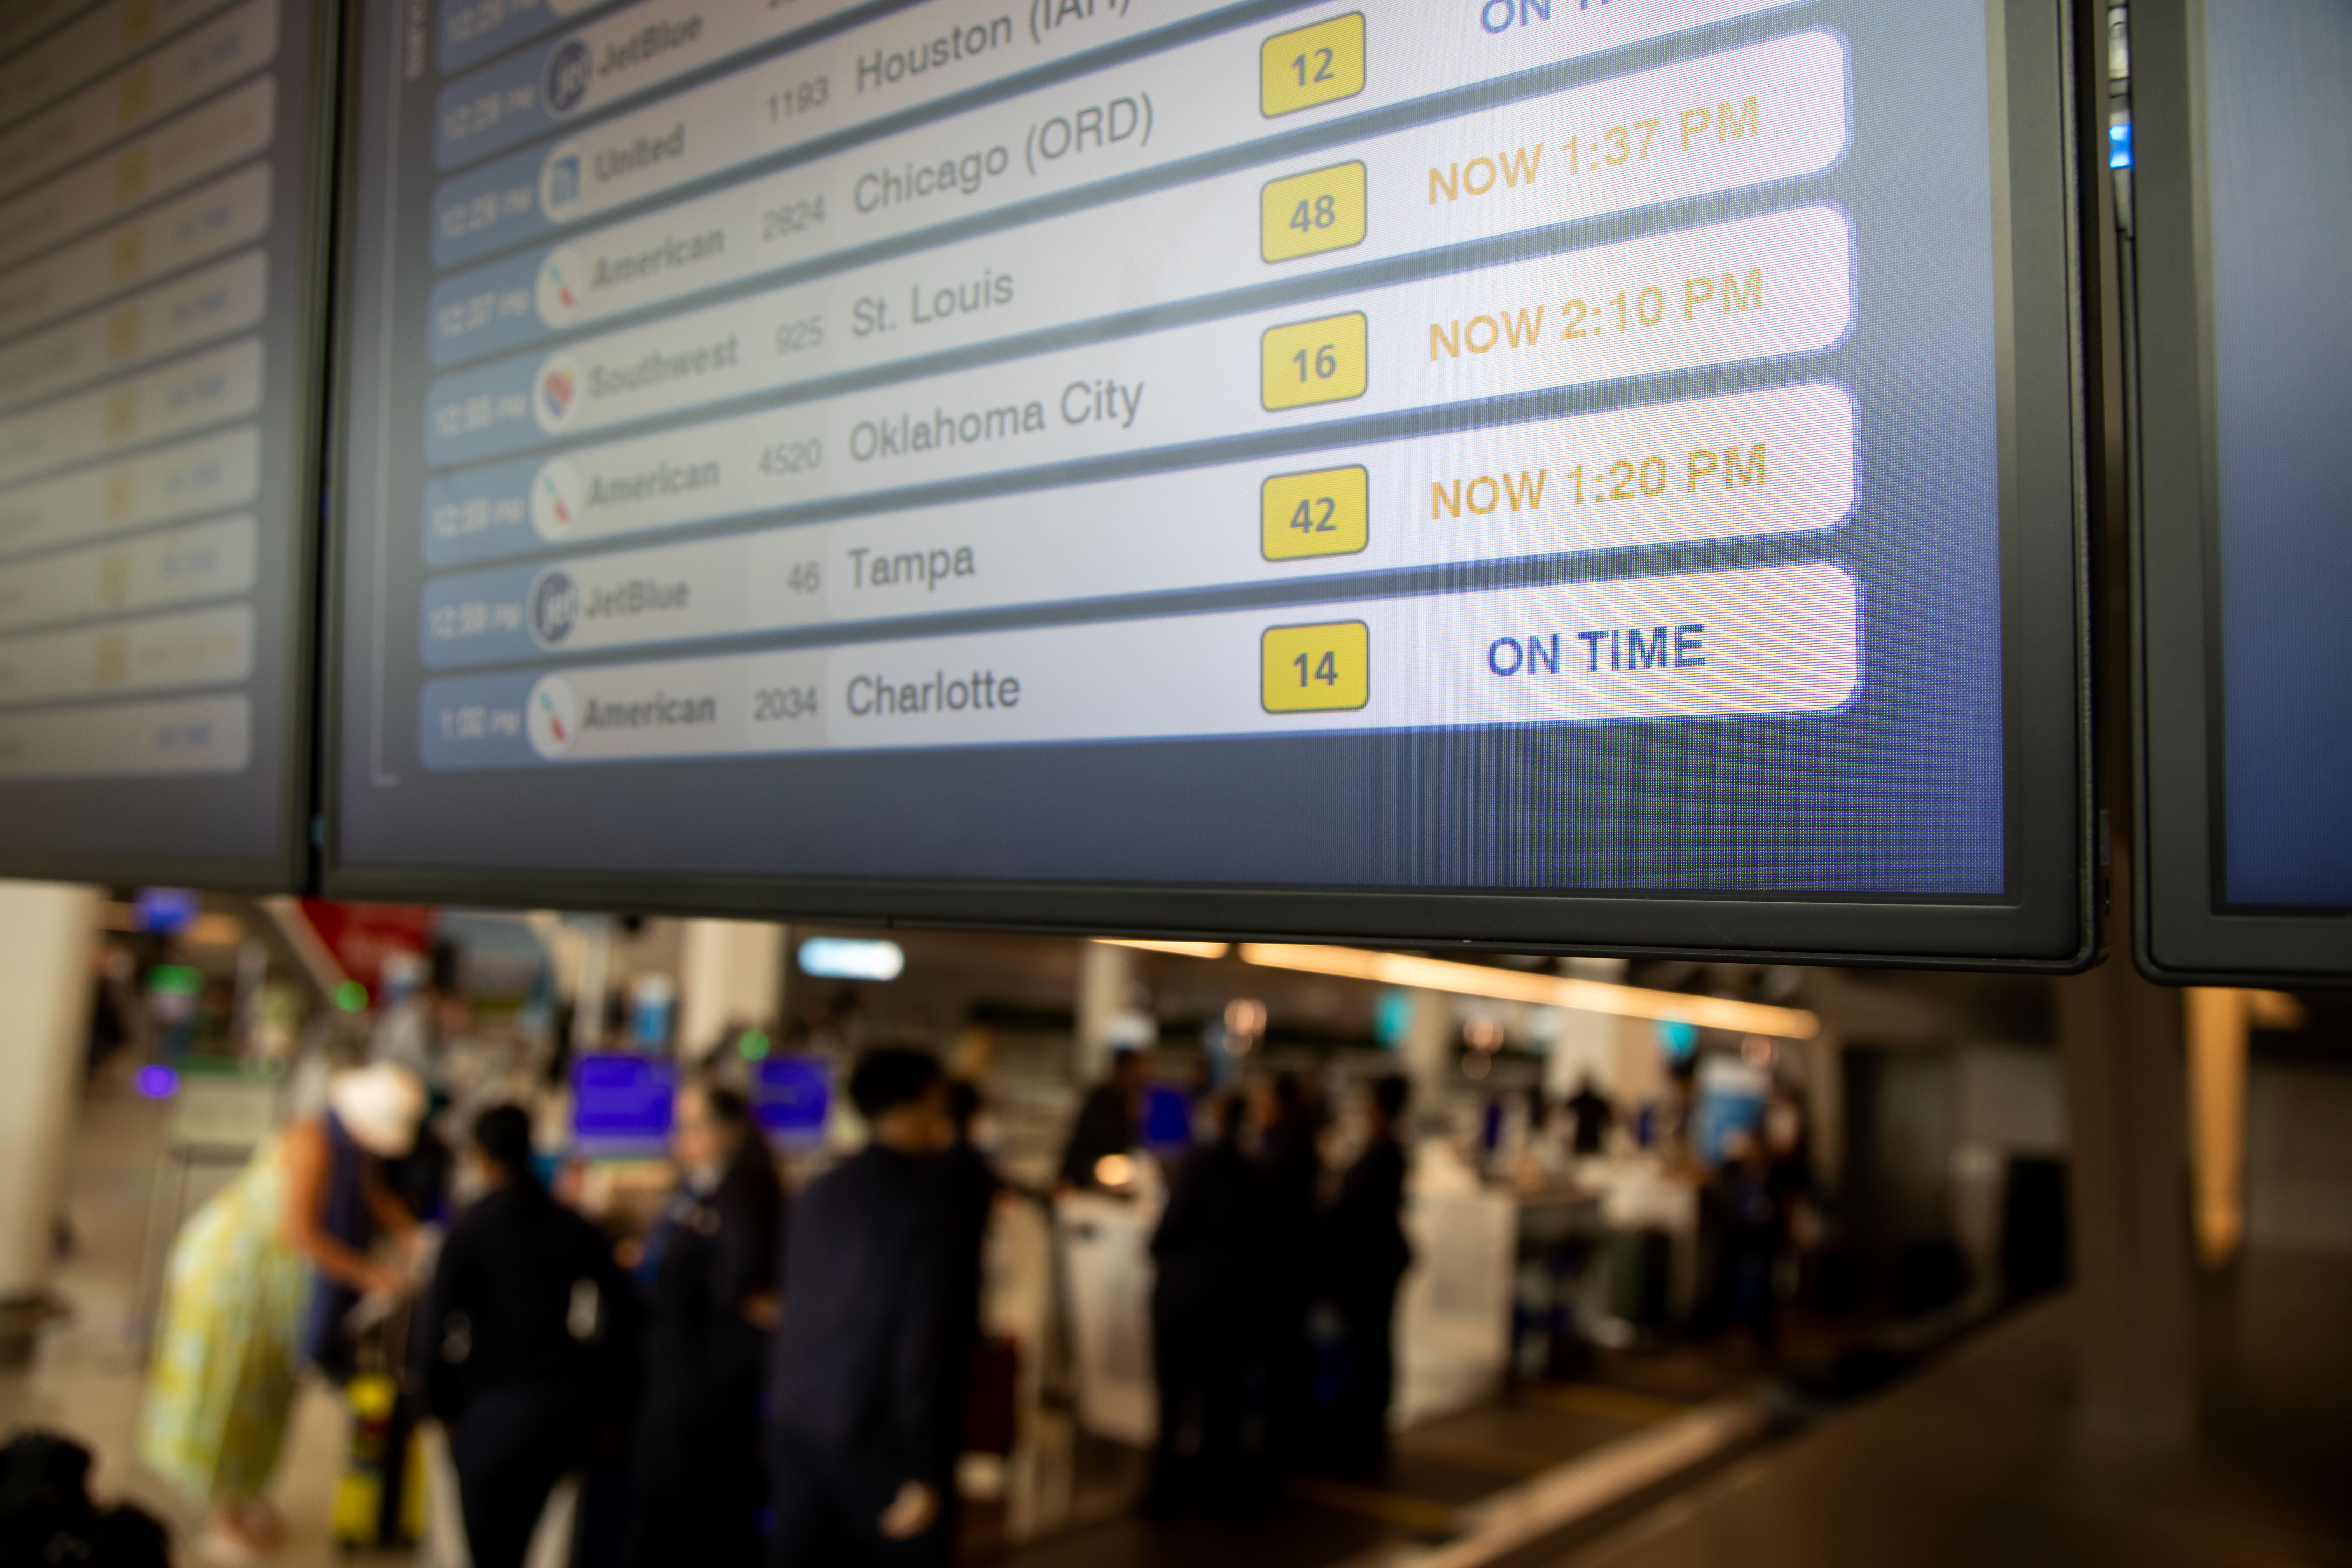 The arrivals board at an airport showing delayed flights.